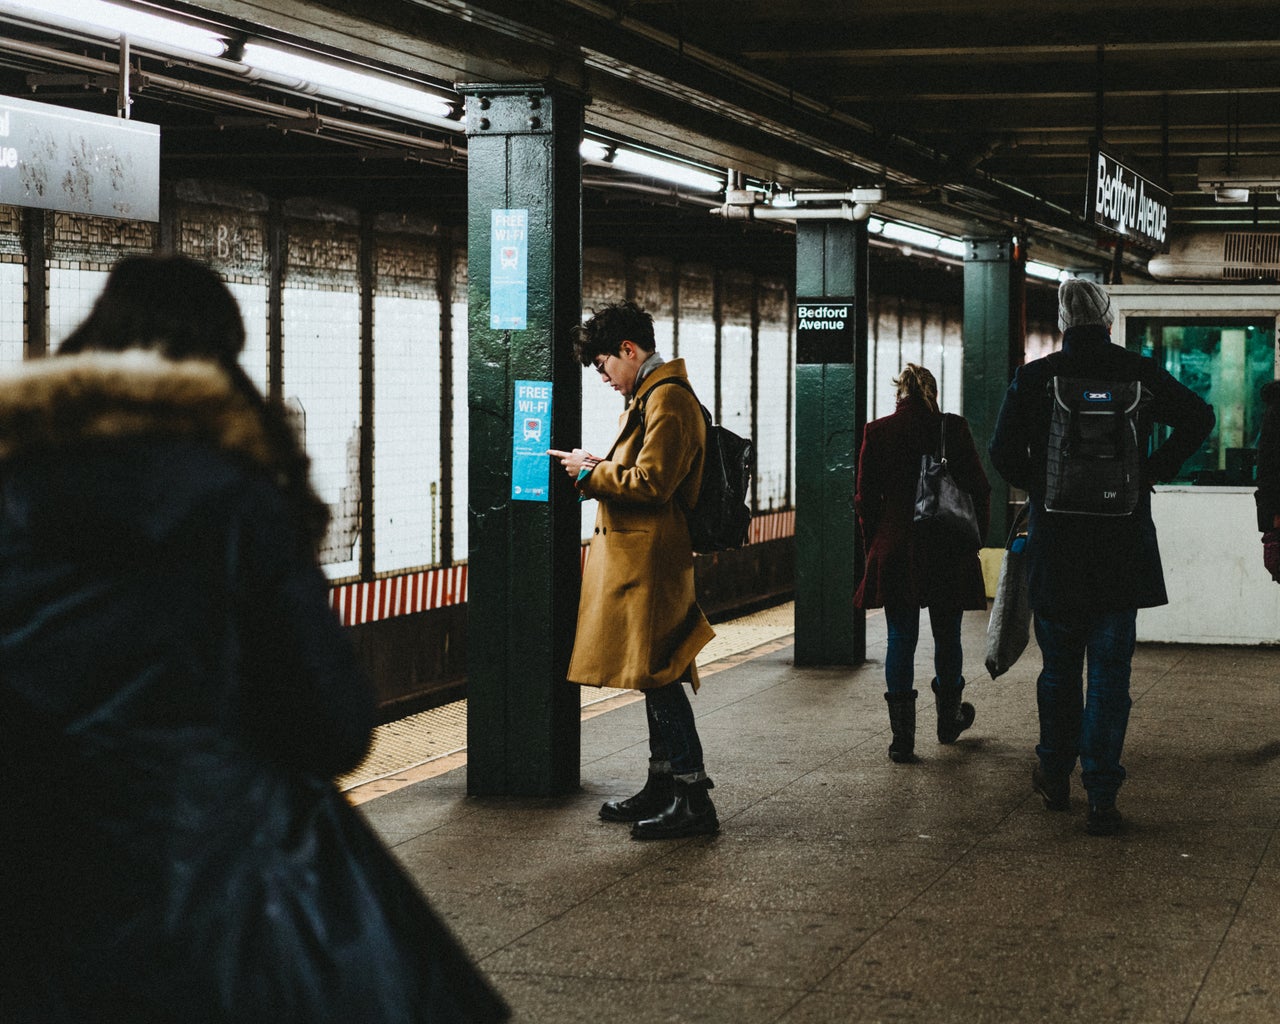 People on their phones, waiting for the next train on a subway platform